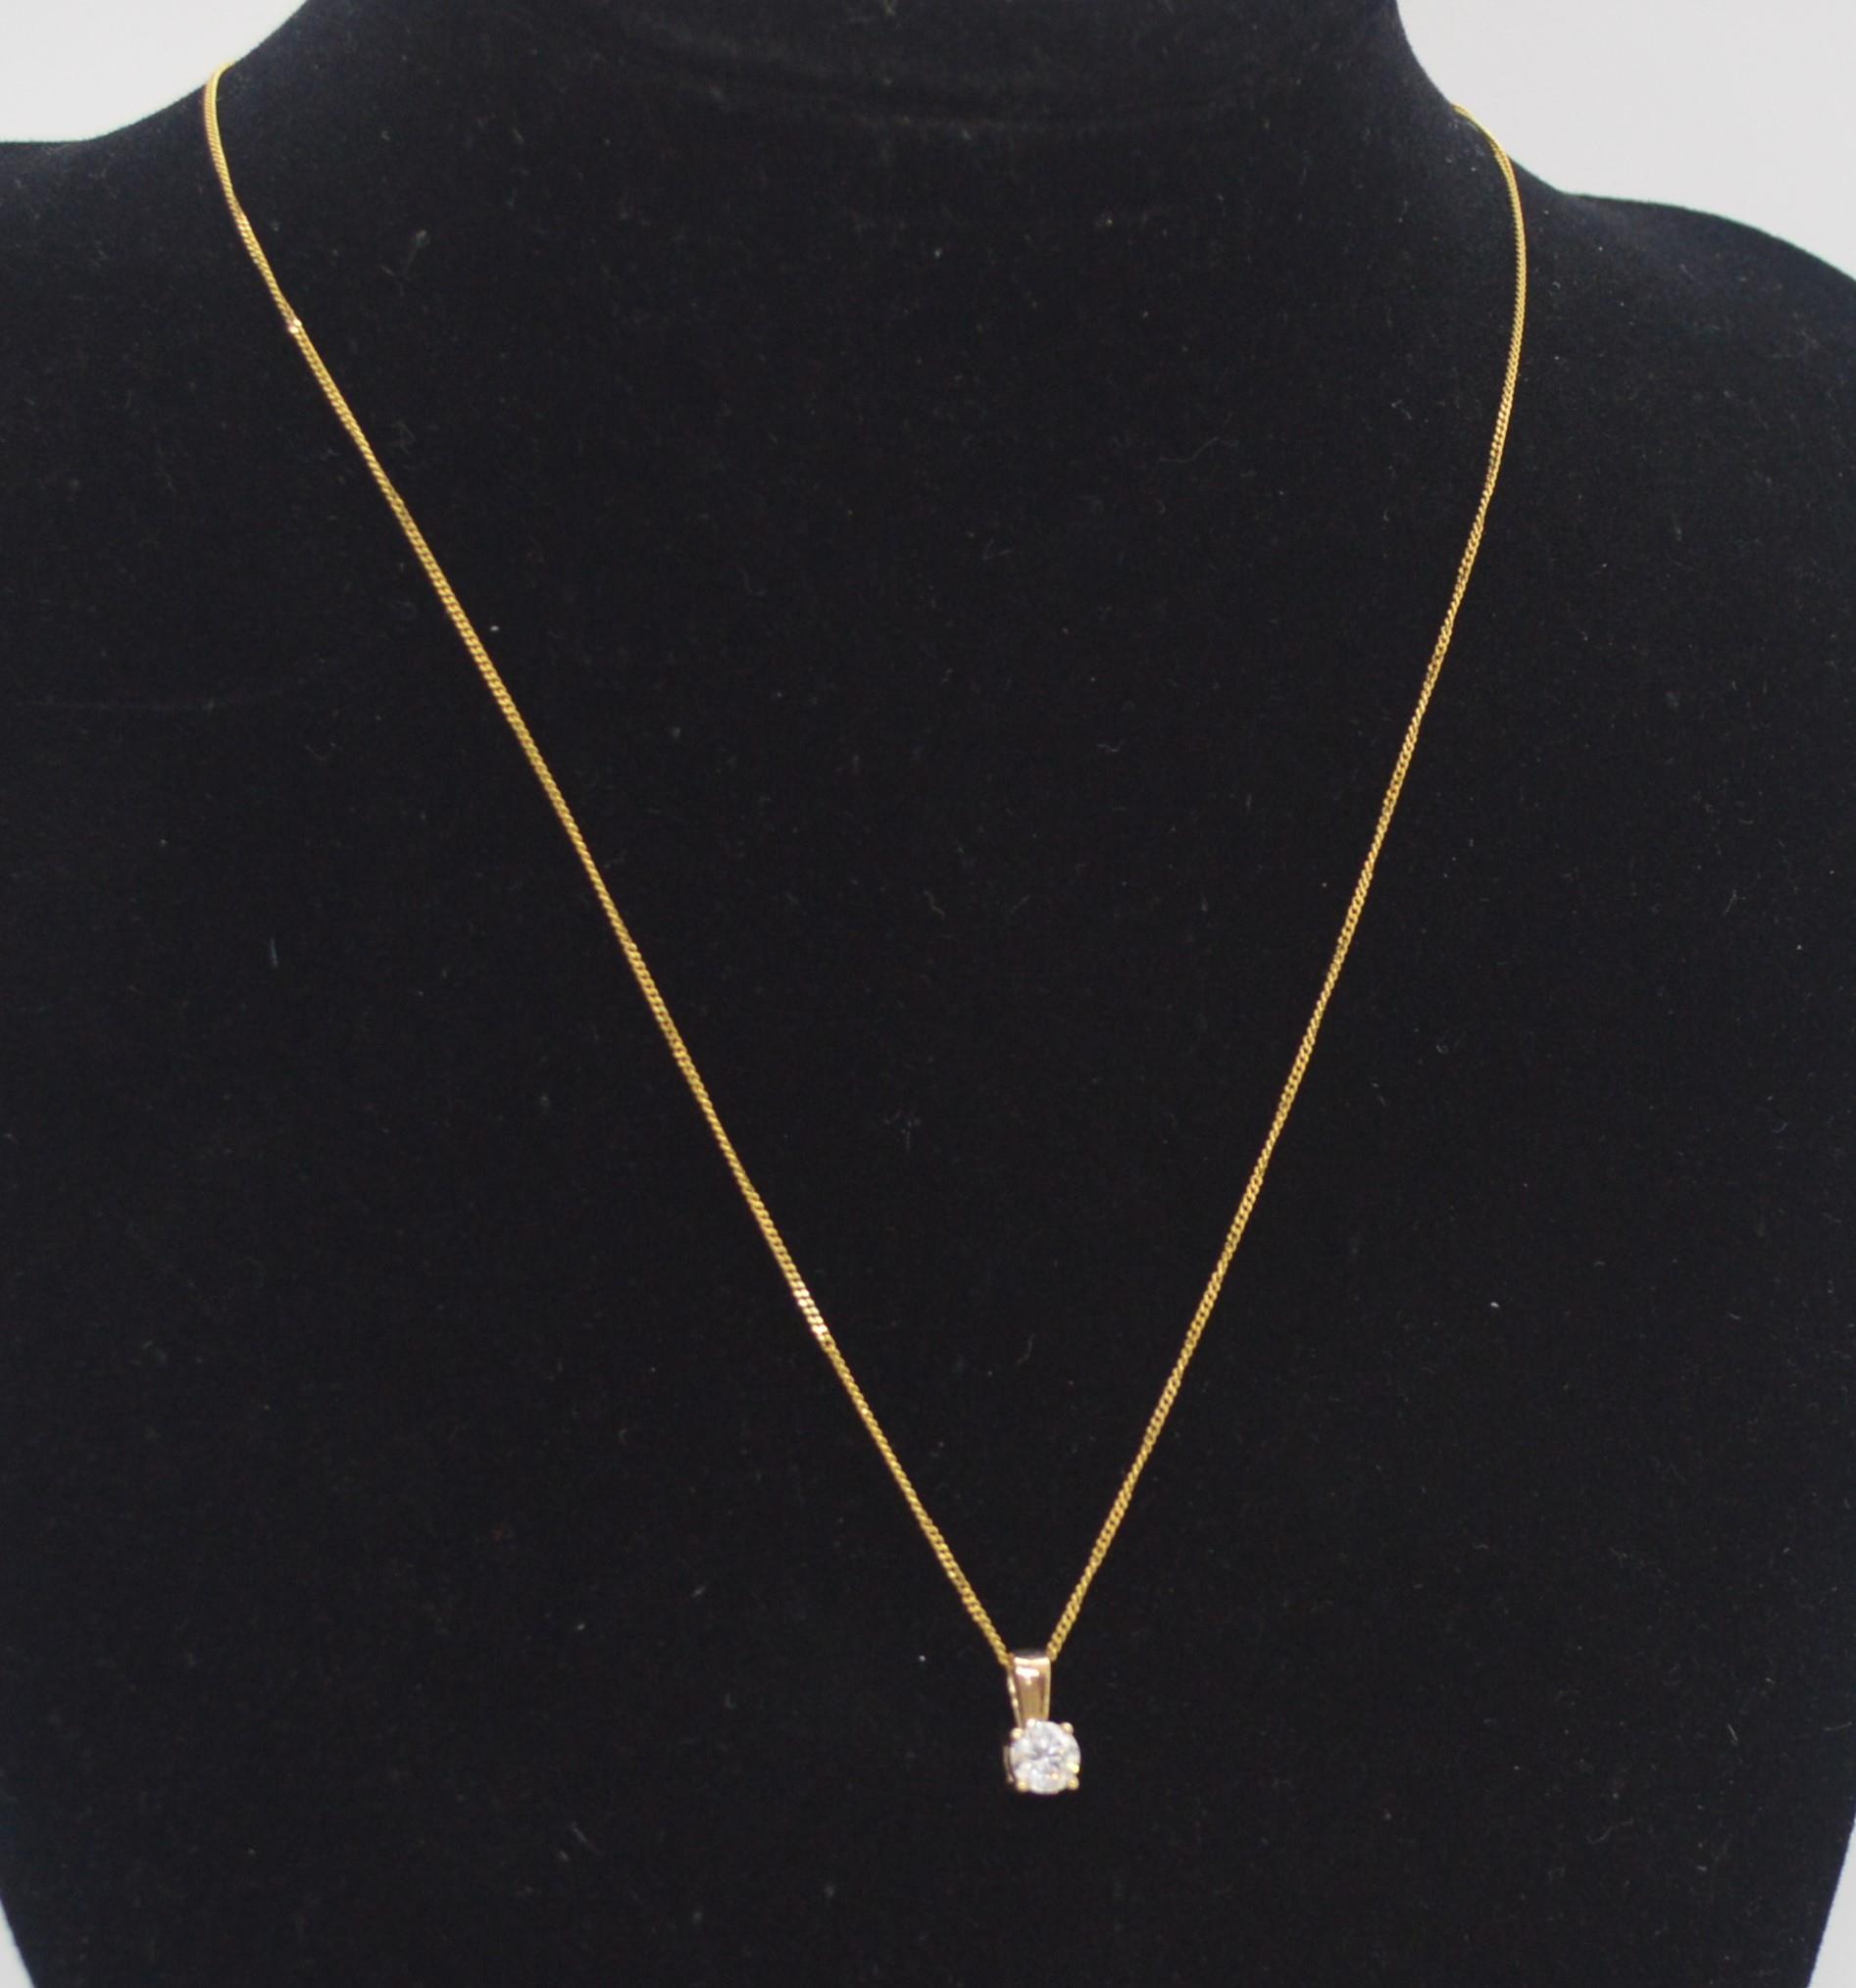 Yellow gold necklace with 0.33ct diamond solitaire pendant marked as 9ct gold - Image 2 of 2